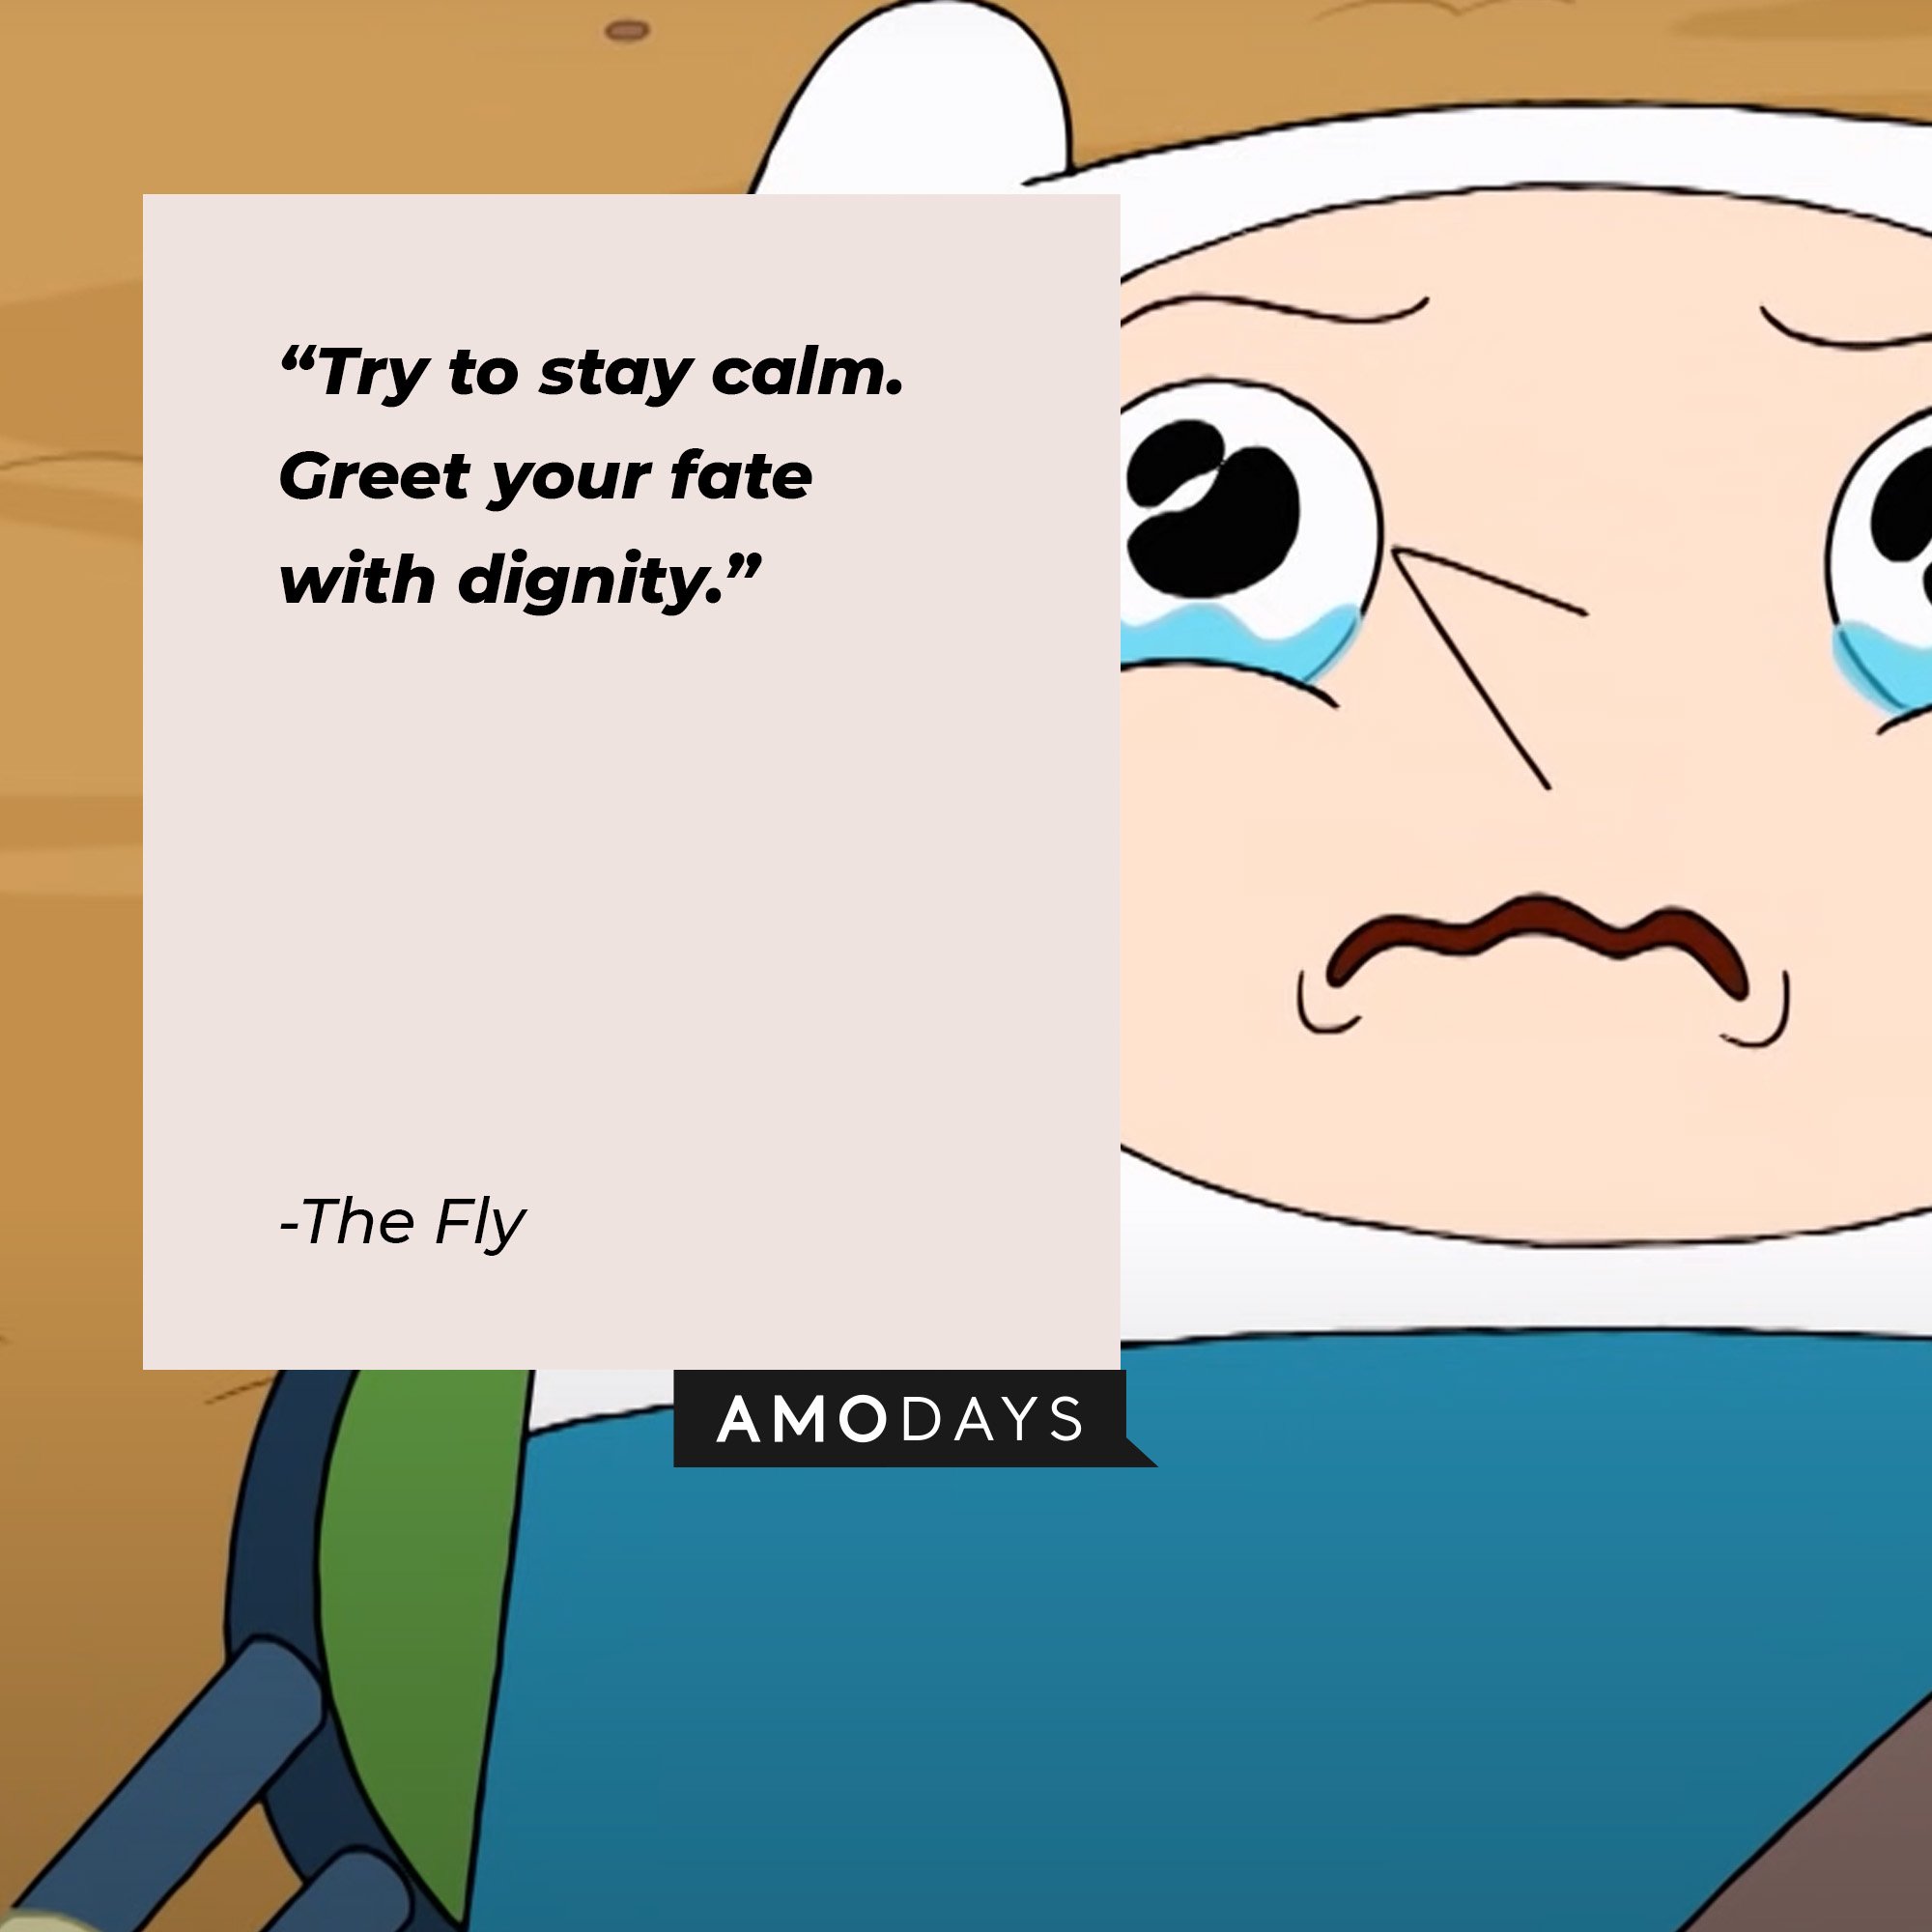 The Fly’s quote: “Try to stay calm. Greet your fate with dignity.”  | Image: AmoDays